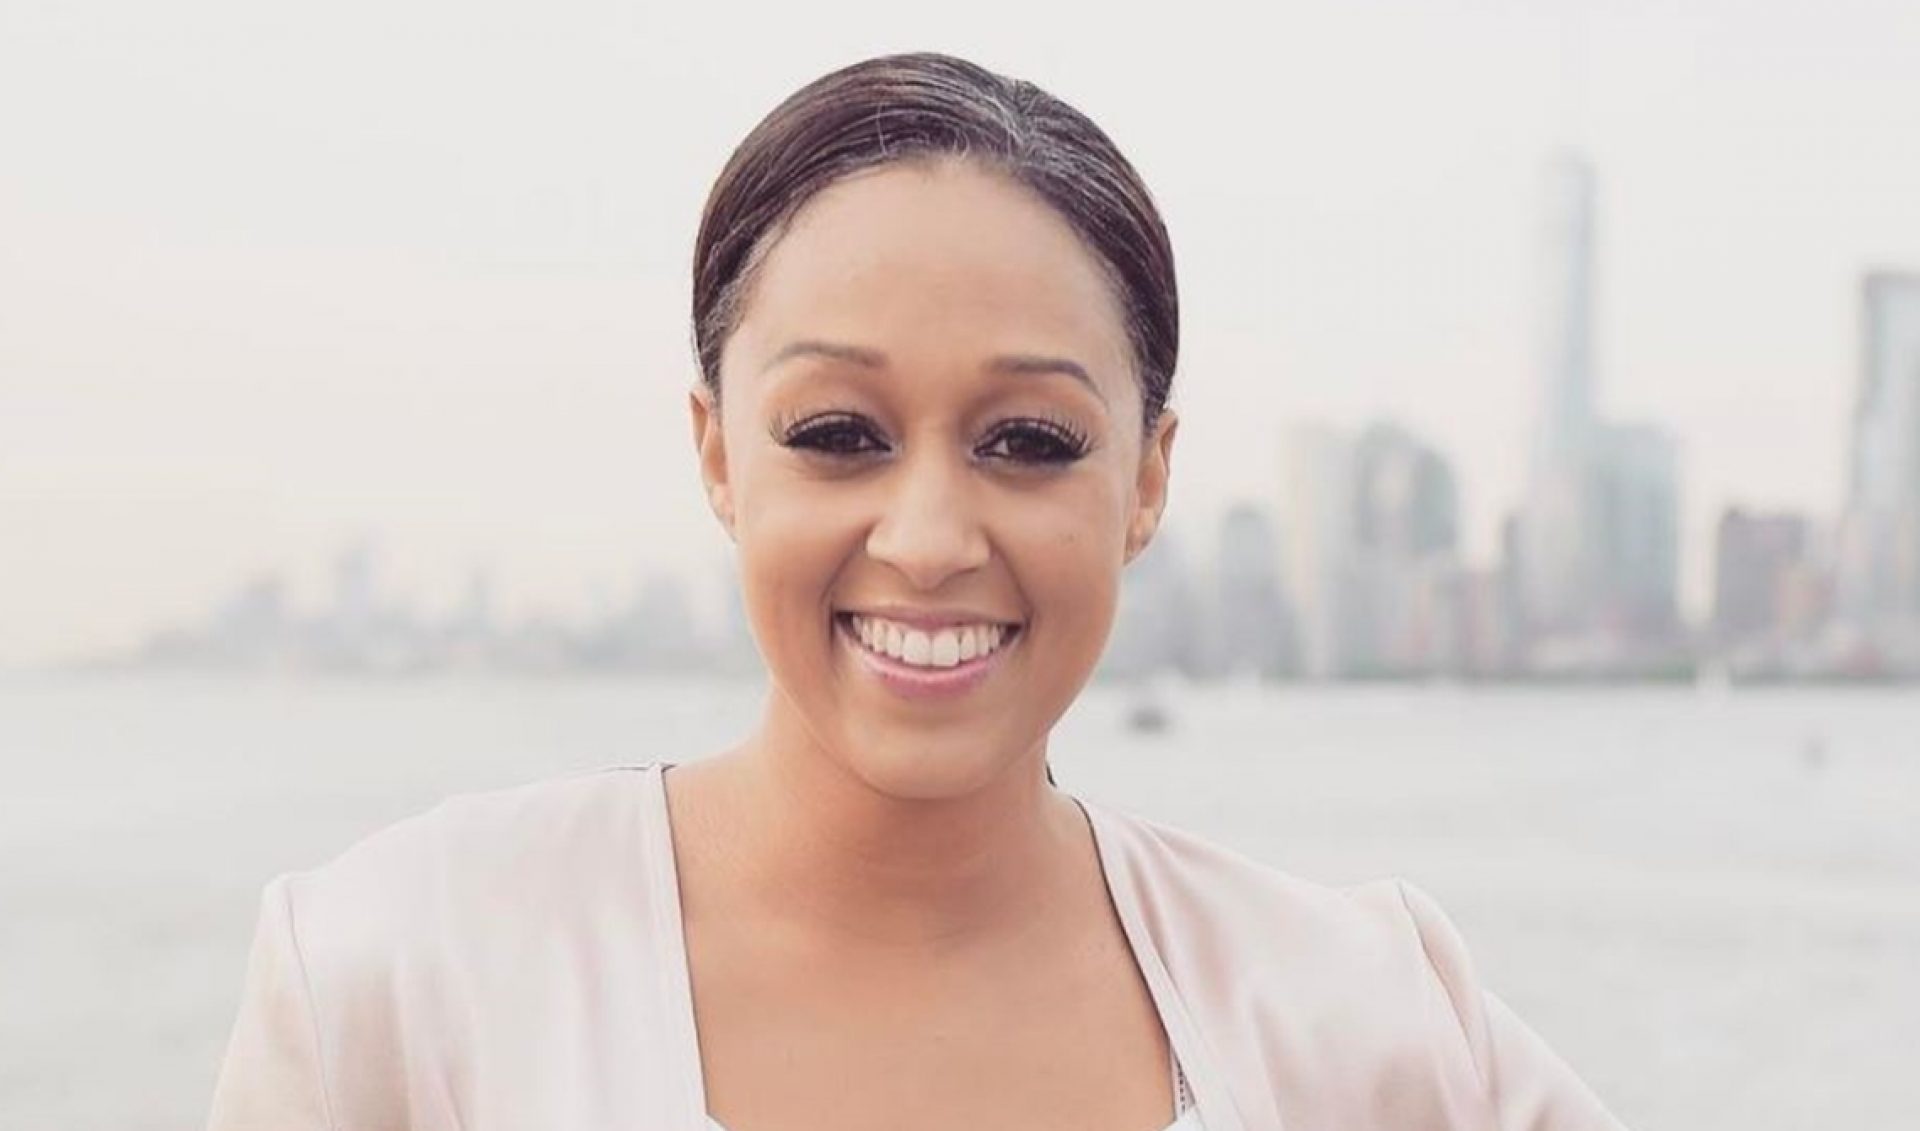 Tia Mowry To Launch ‘Quick Fix’ Web Series In Partnership With Kin Community